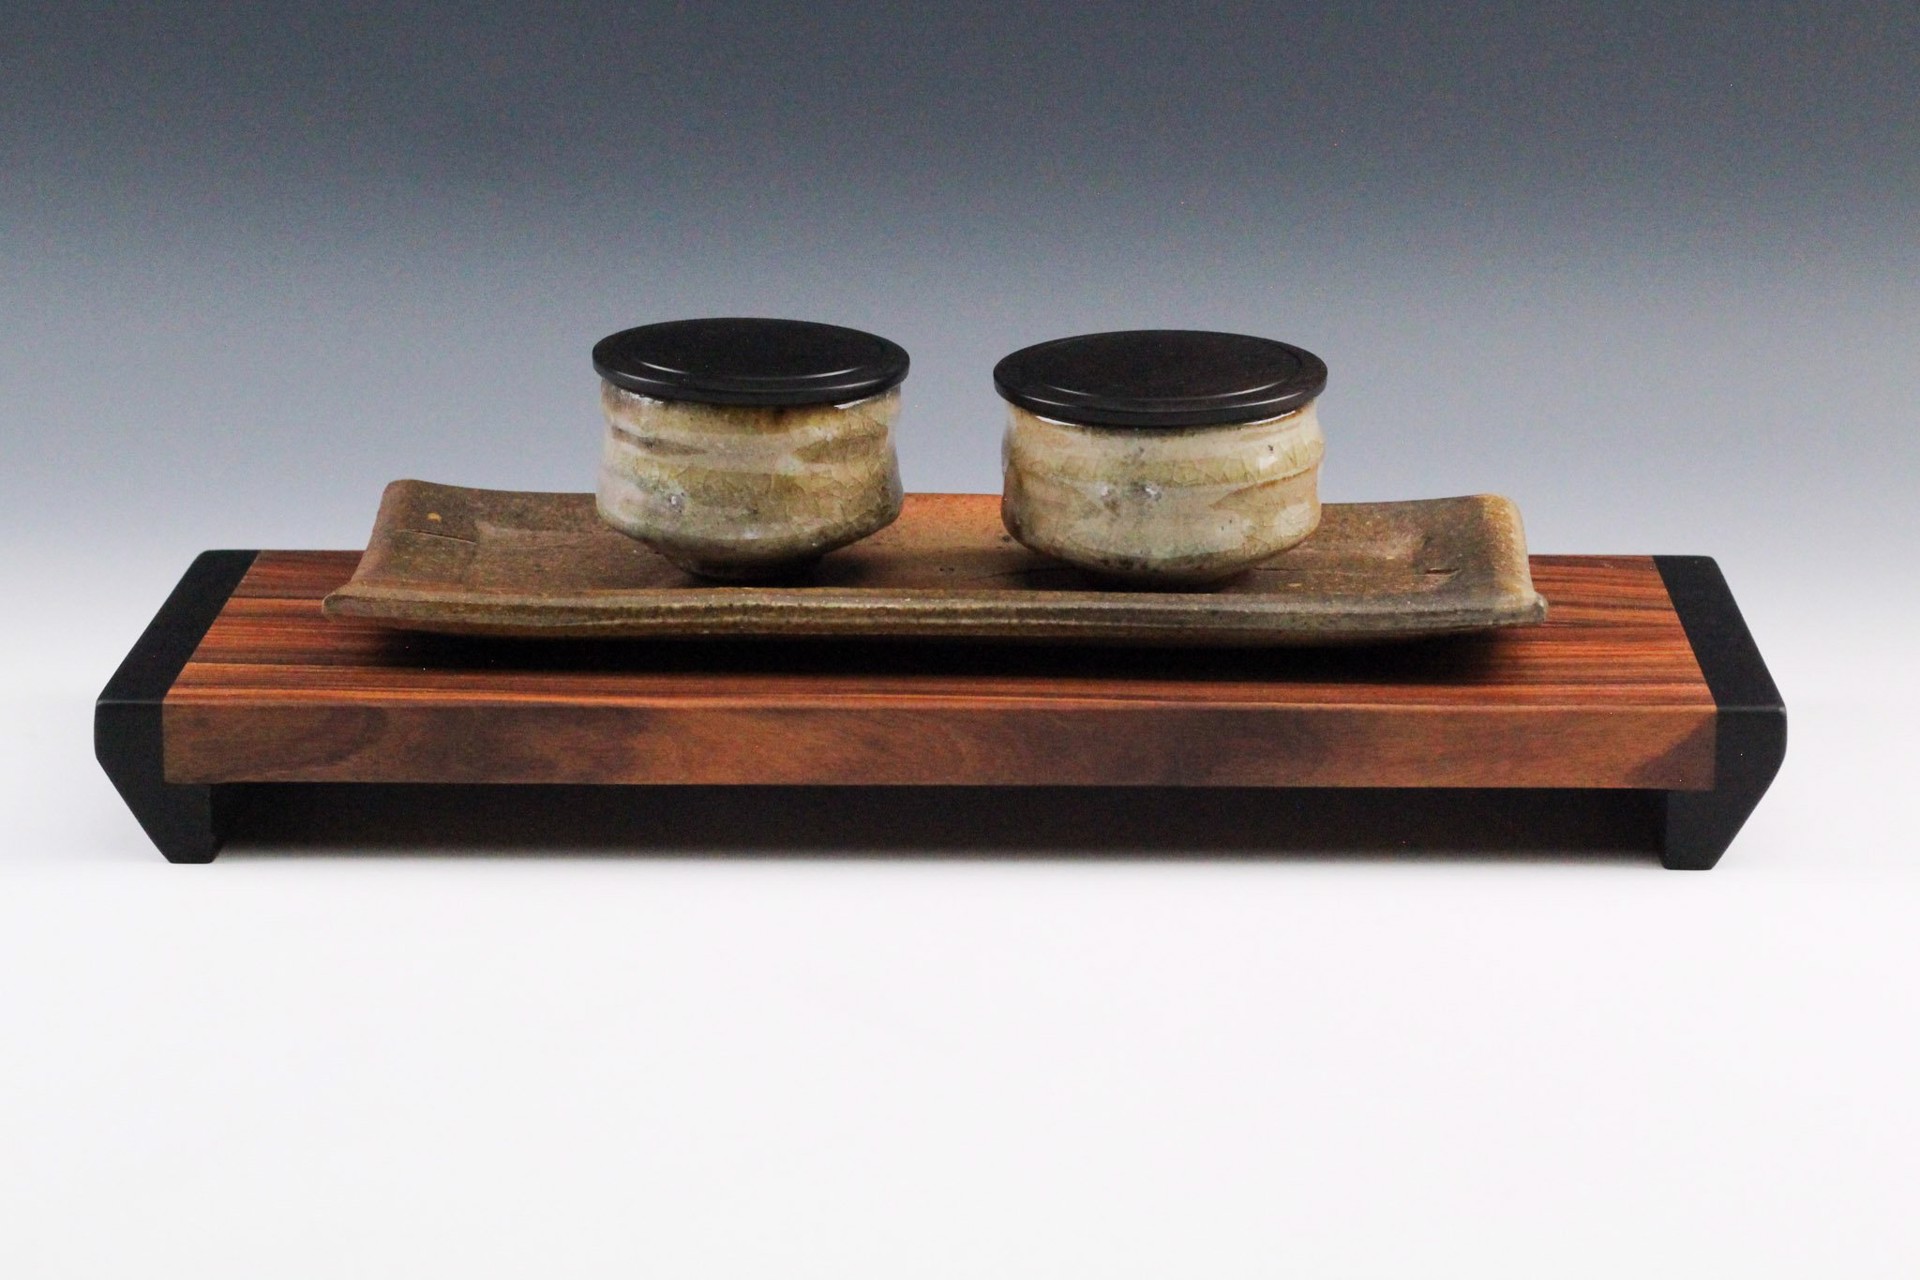 Sushi Tray & Dipping Dishes by Reid Schoonover